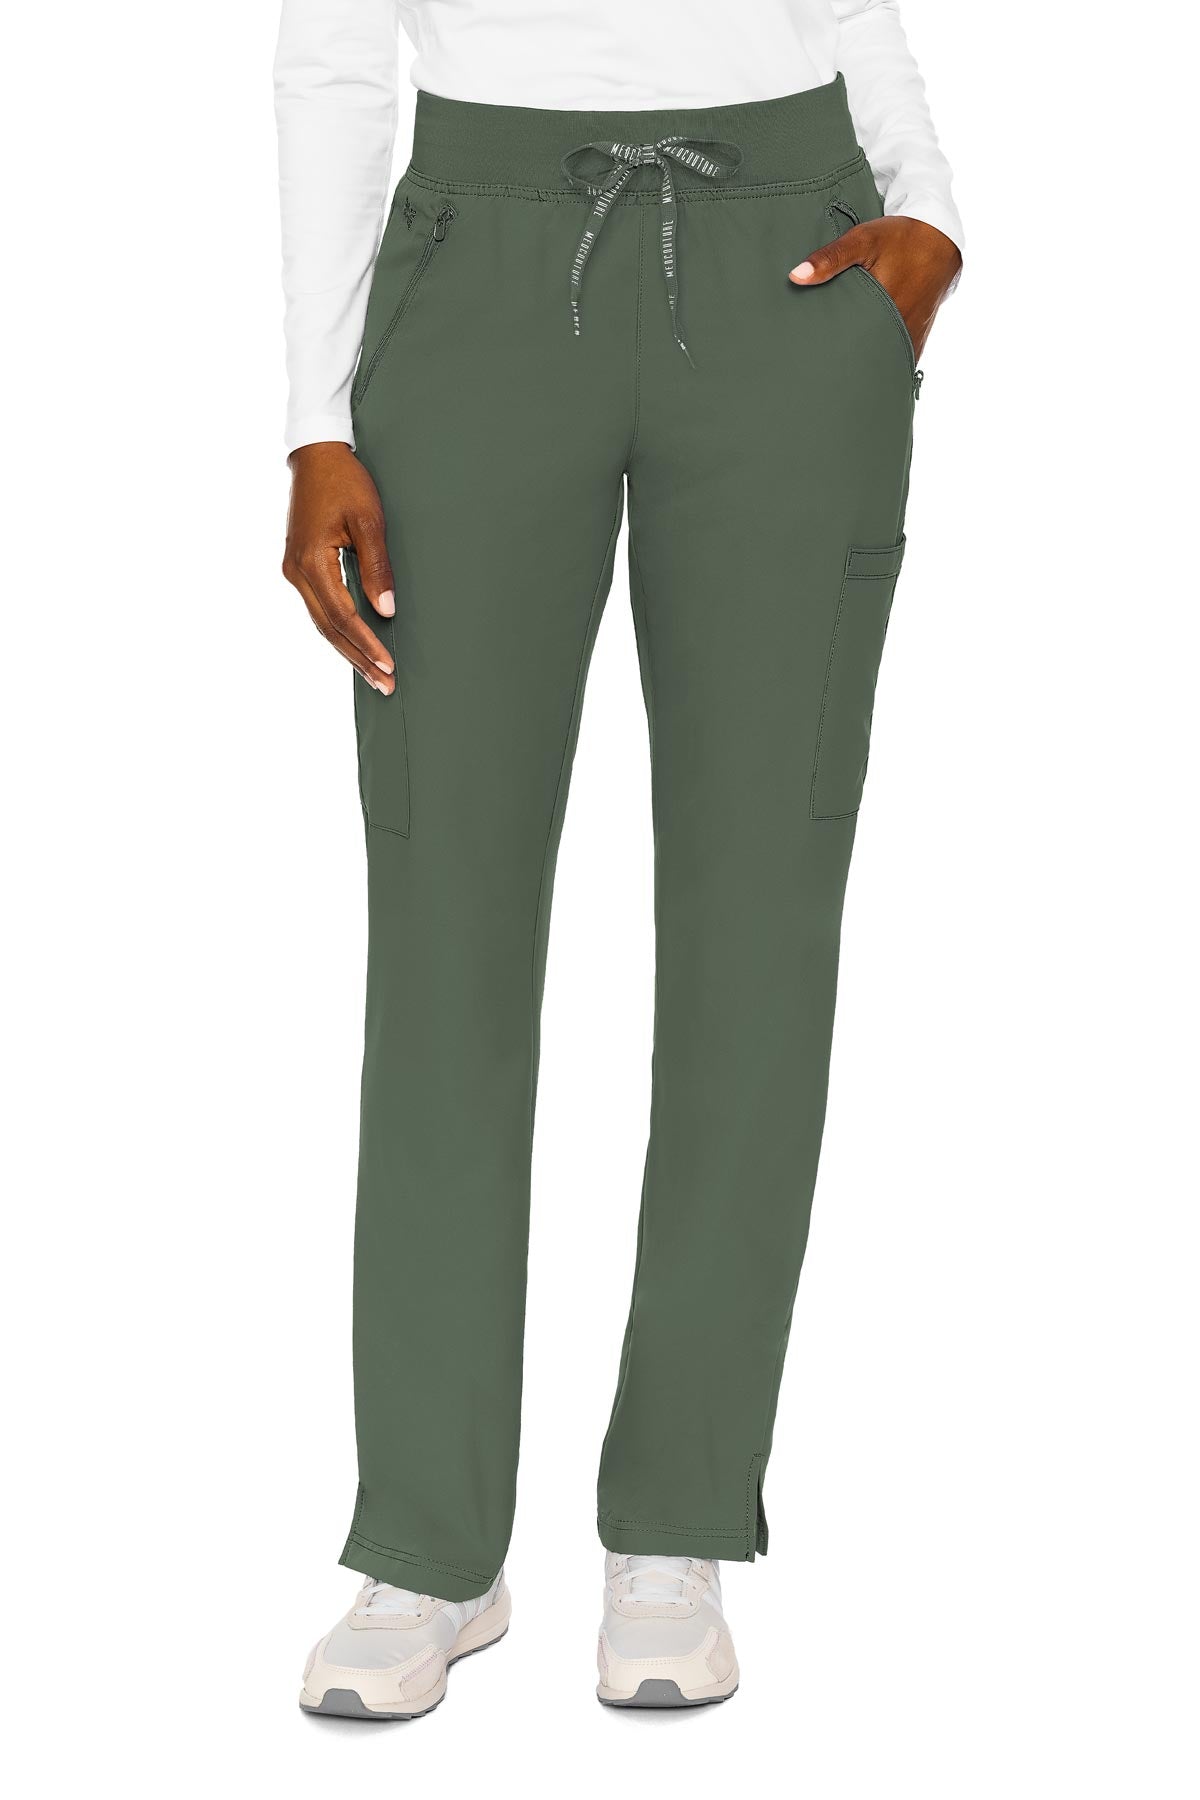 Med Couture Scrub Pants Insight Zipper Pocket Pant in Olive at Parker's Clothing and Shoes